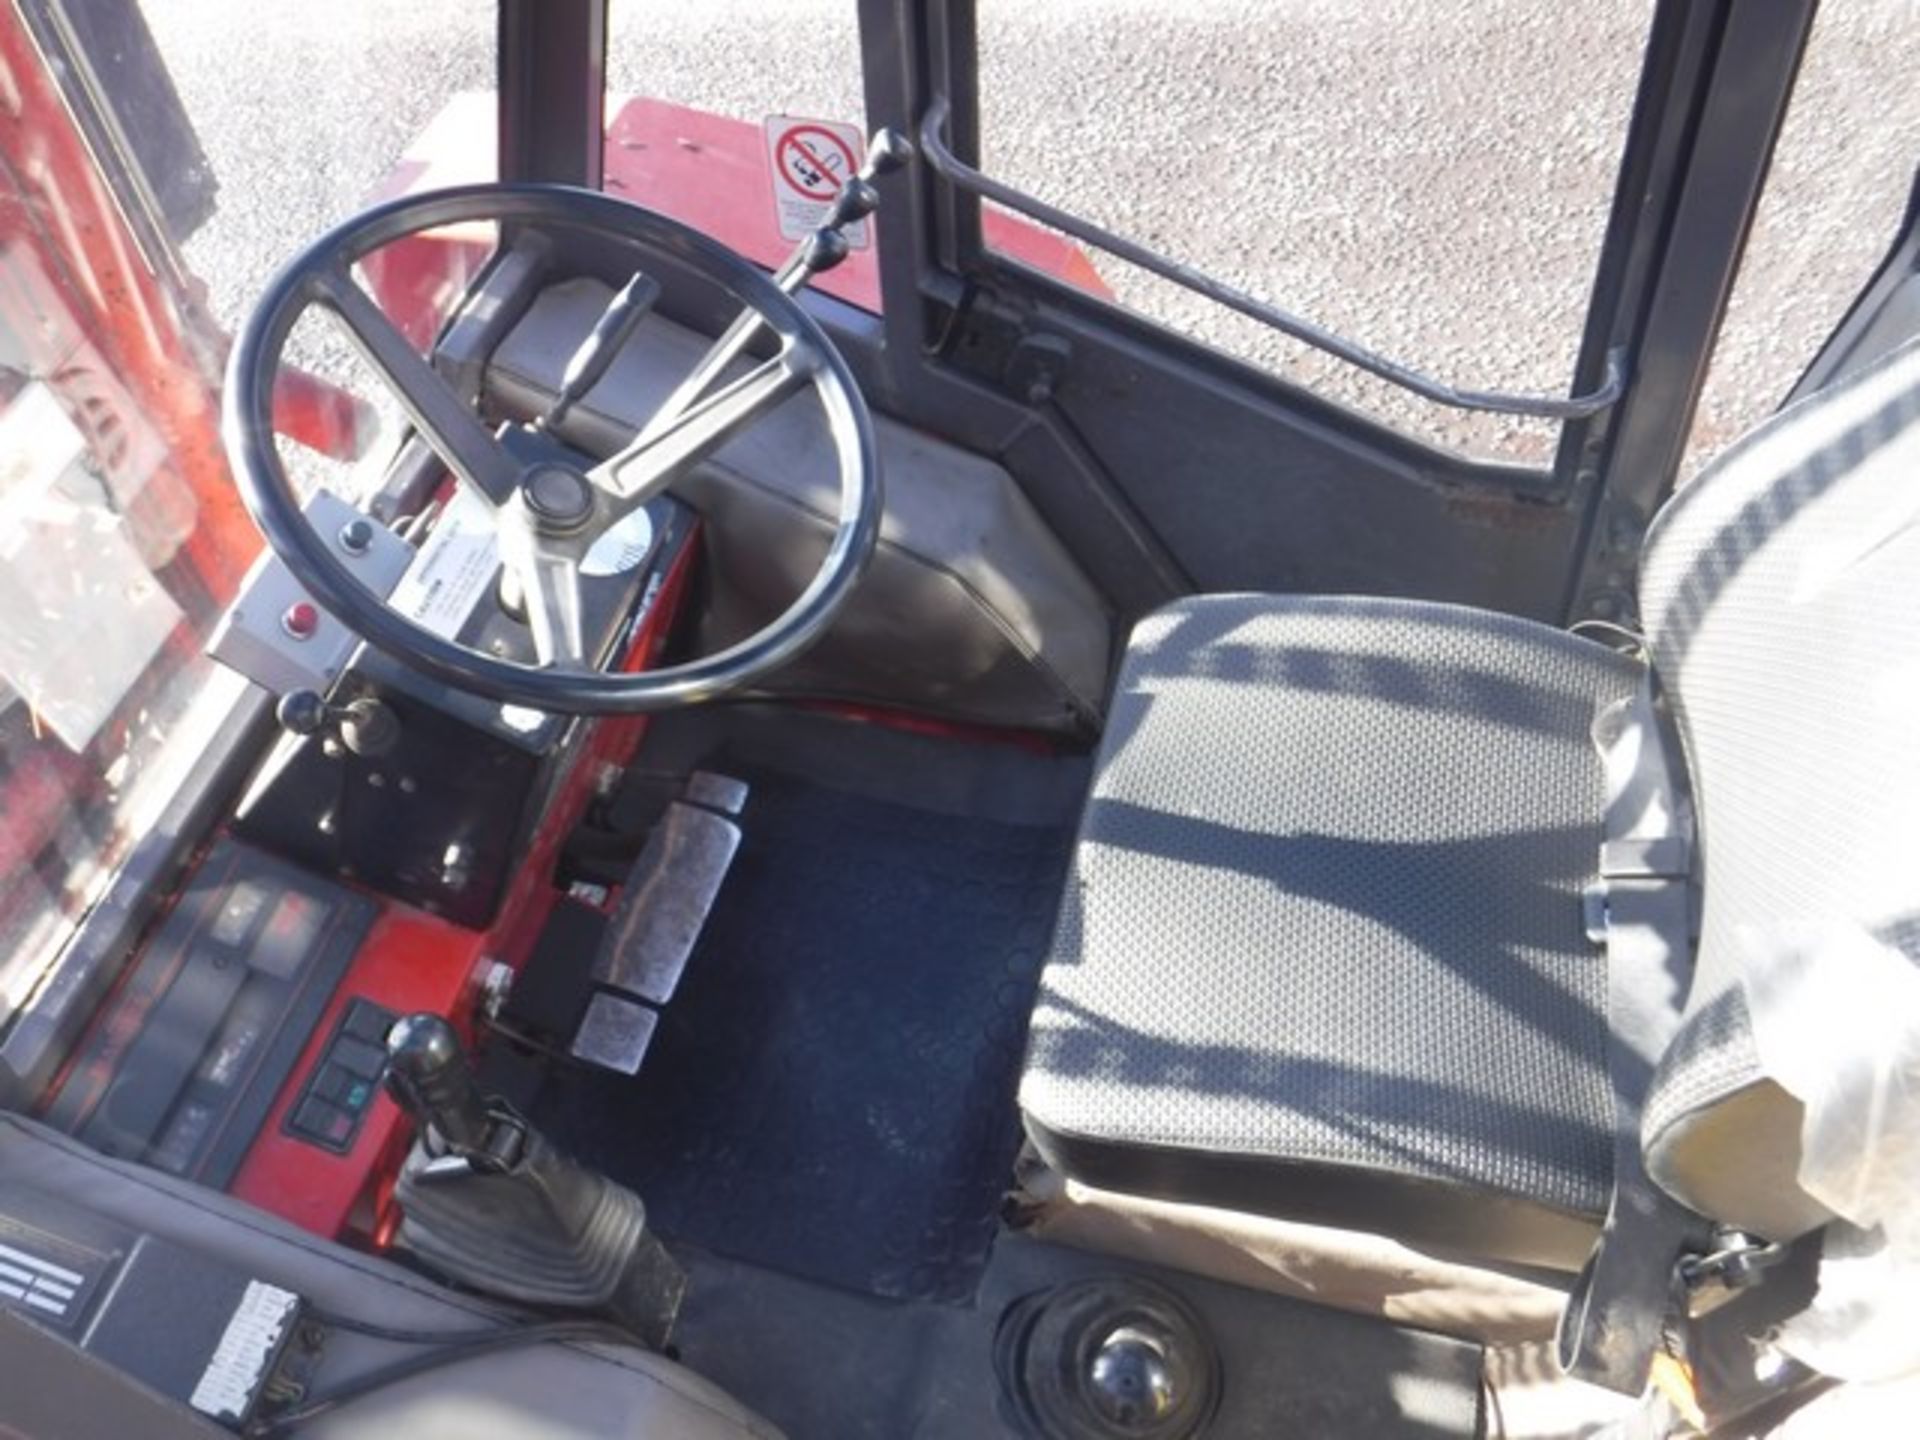 MANITOU M226CP, S/N 103001, ROUGH TERRAIN FORKLIFT WITH SIDE SHIFT, 5007HRS (NOT VERIFIED) - Image 7 of 11